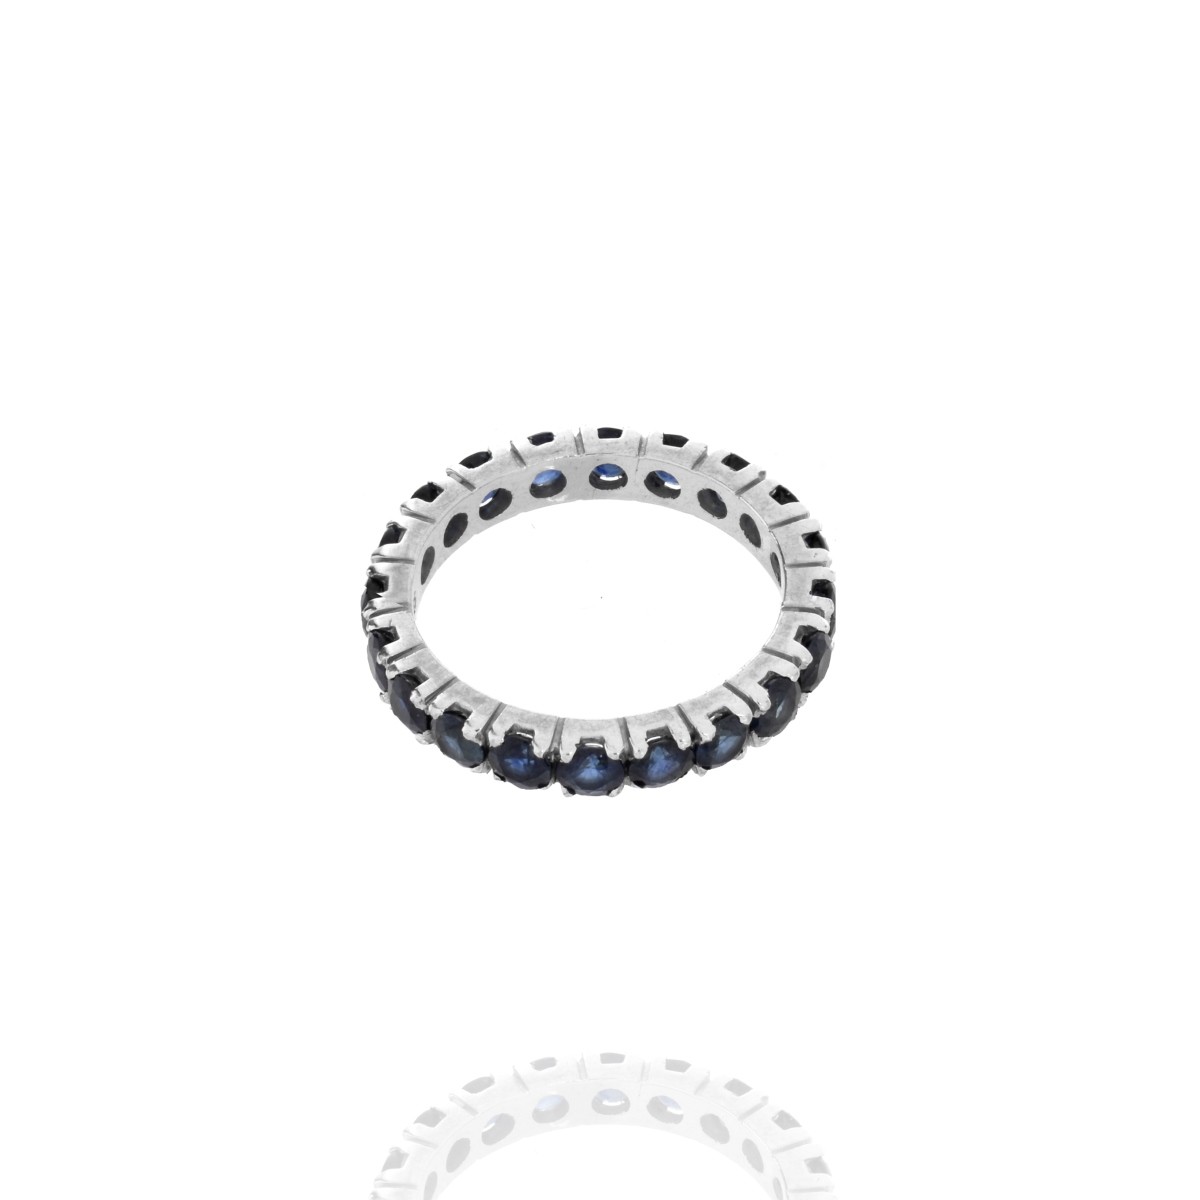 Sapphire and 14K Ring